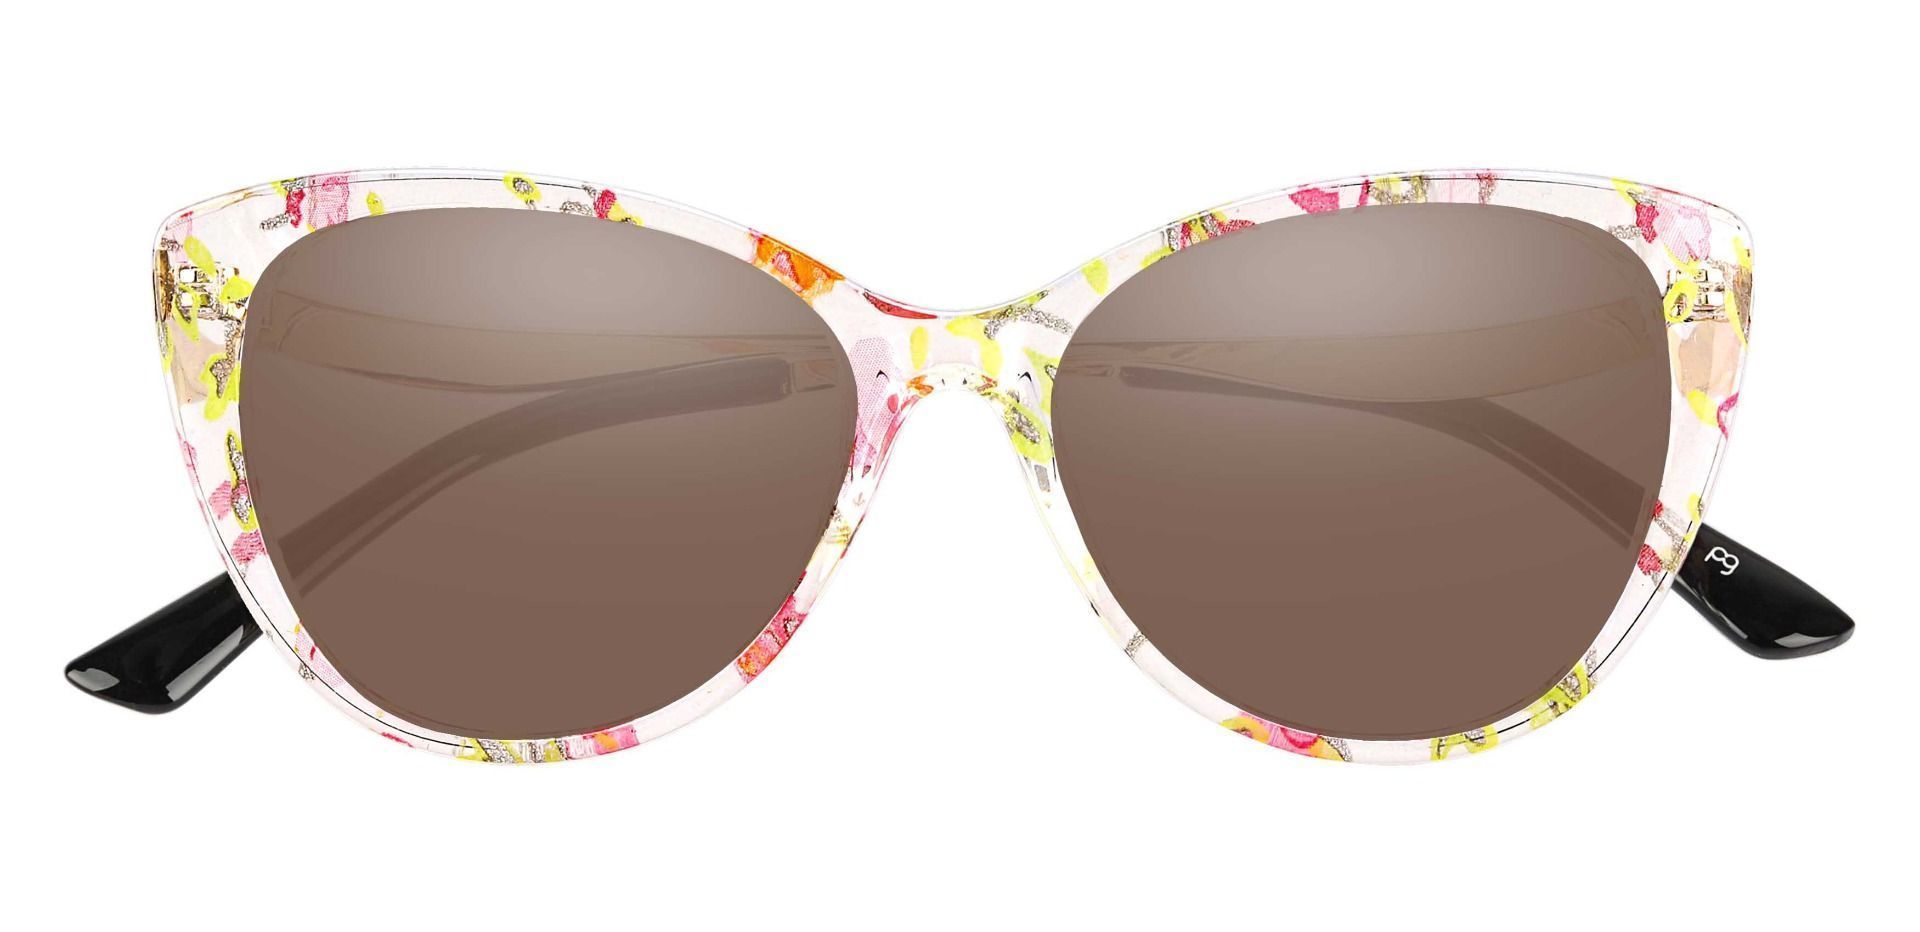 Roma Cat Eye Prescription Sunglasses - Floral Frame With Brown Lenses